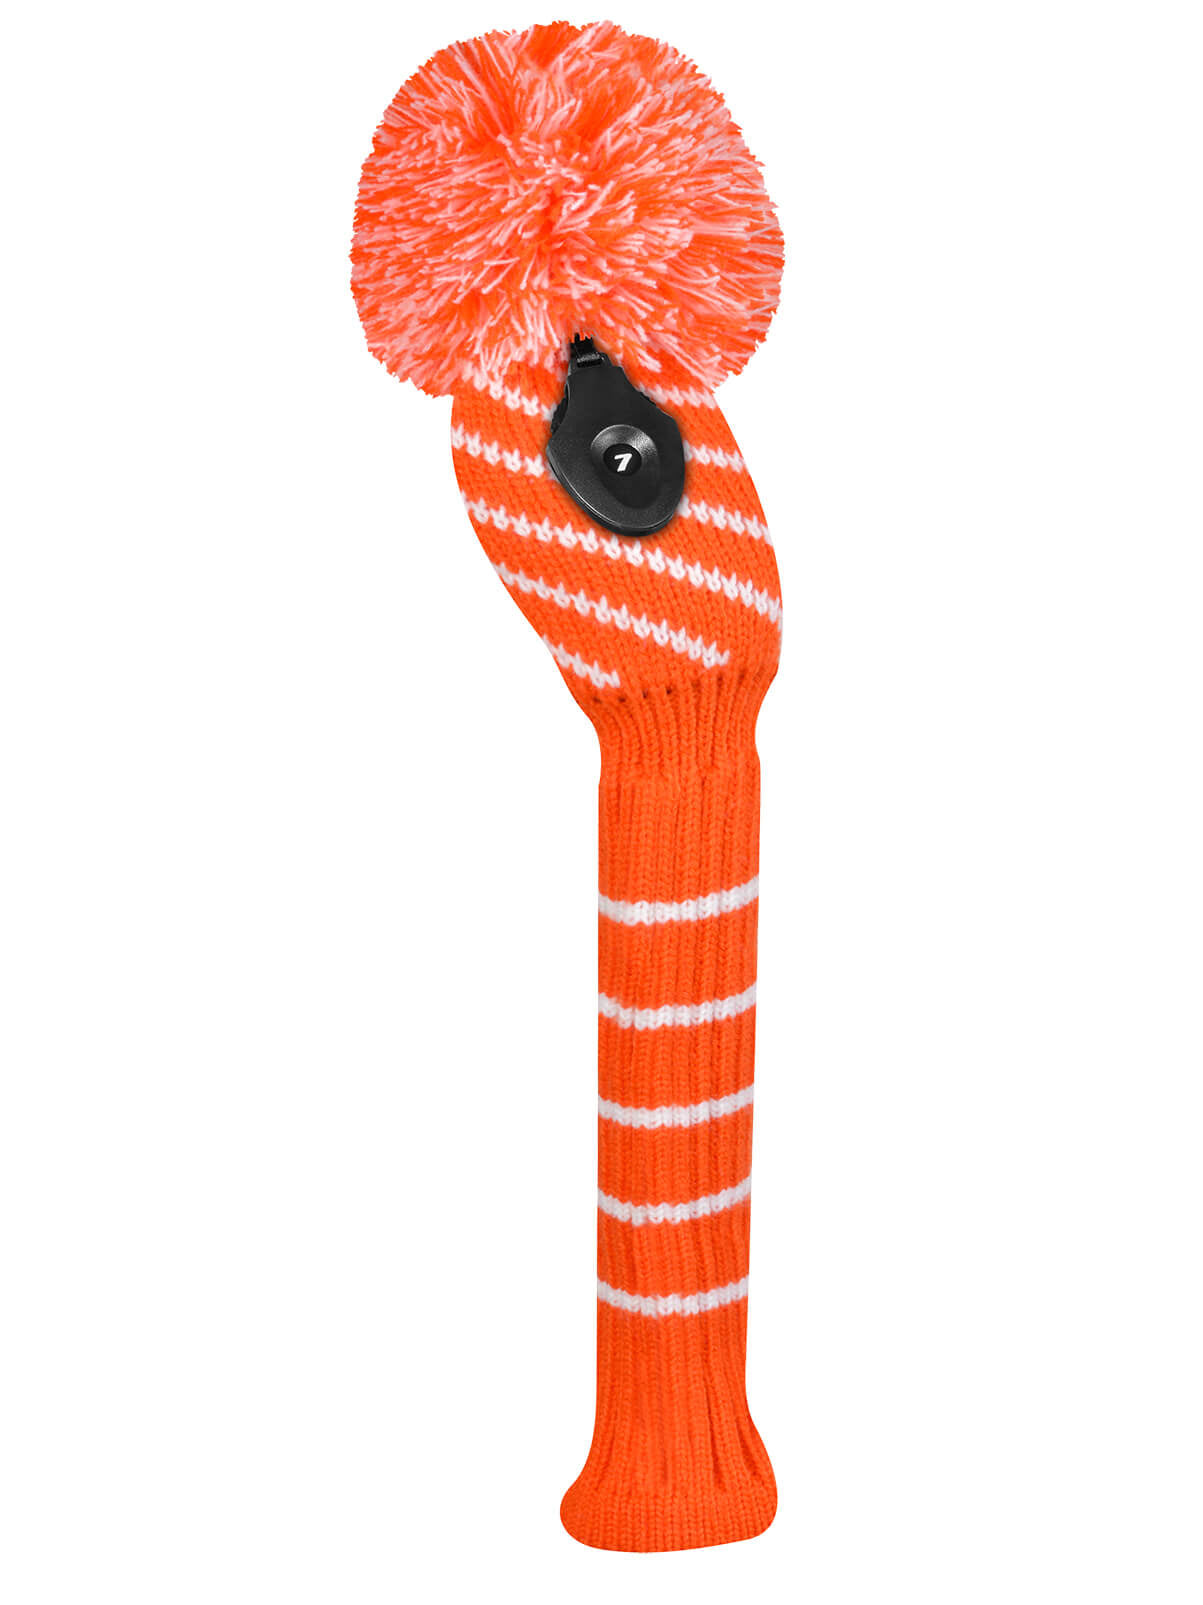 Just 4 Golf: Colorful Knit Golf Club Covers & Accessories, Par